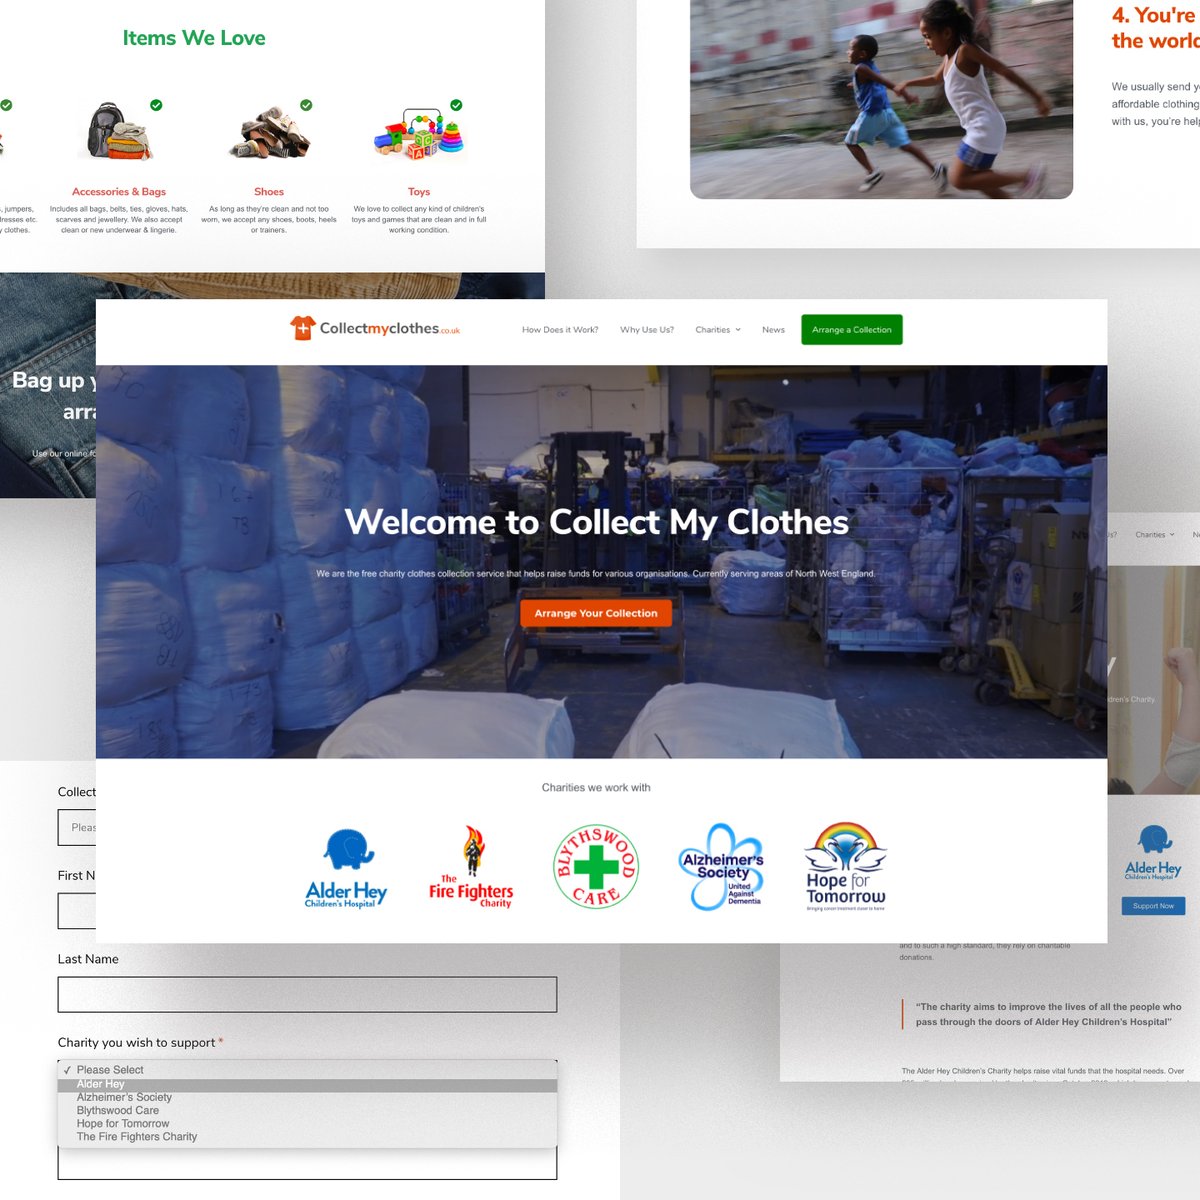 Recently, we launched a new website for our brilliant client, Collect My Clothes. Using @WordPress we were able to create a clear site structure and easy-to-use online forms. Check out their site here: bit.ly/2Q9E721

#CollectMyClothes #WordPress #WebDevelopment